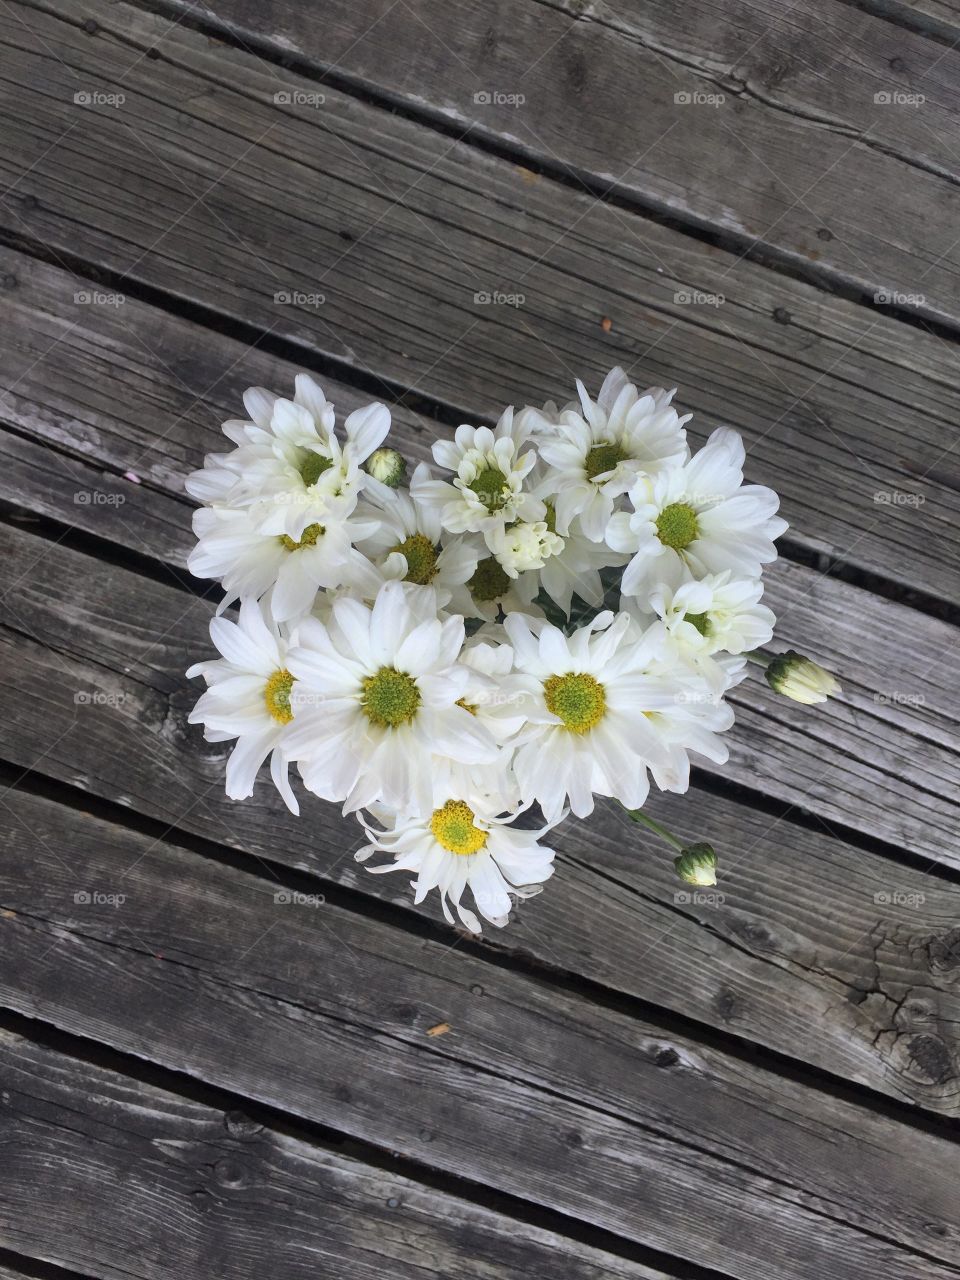 Heart Shaped Bouquet of Daisies